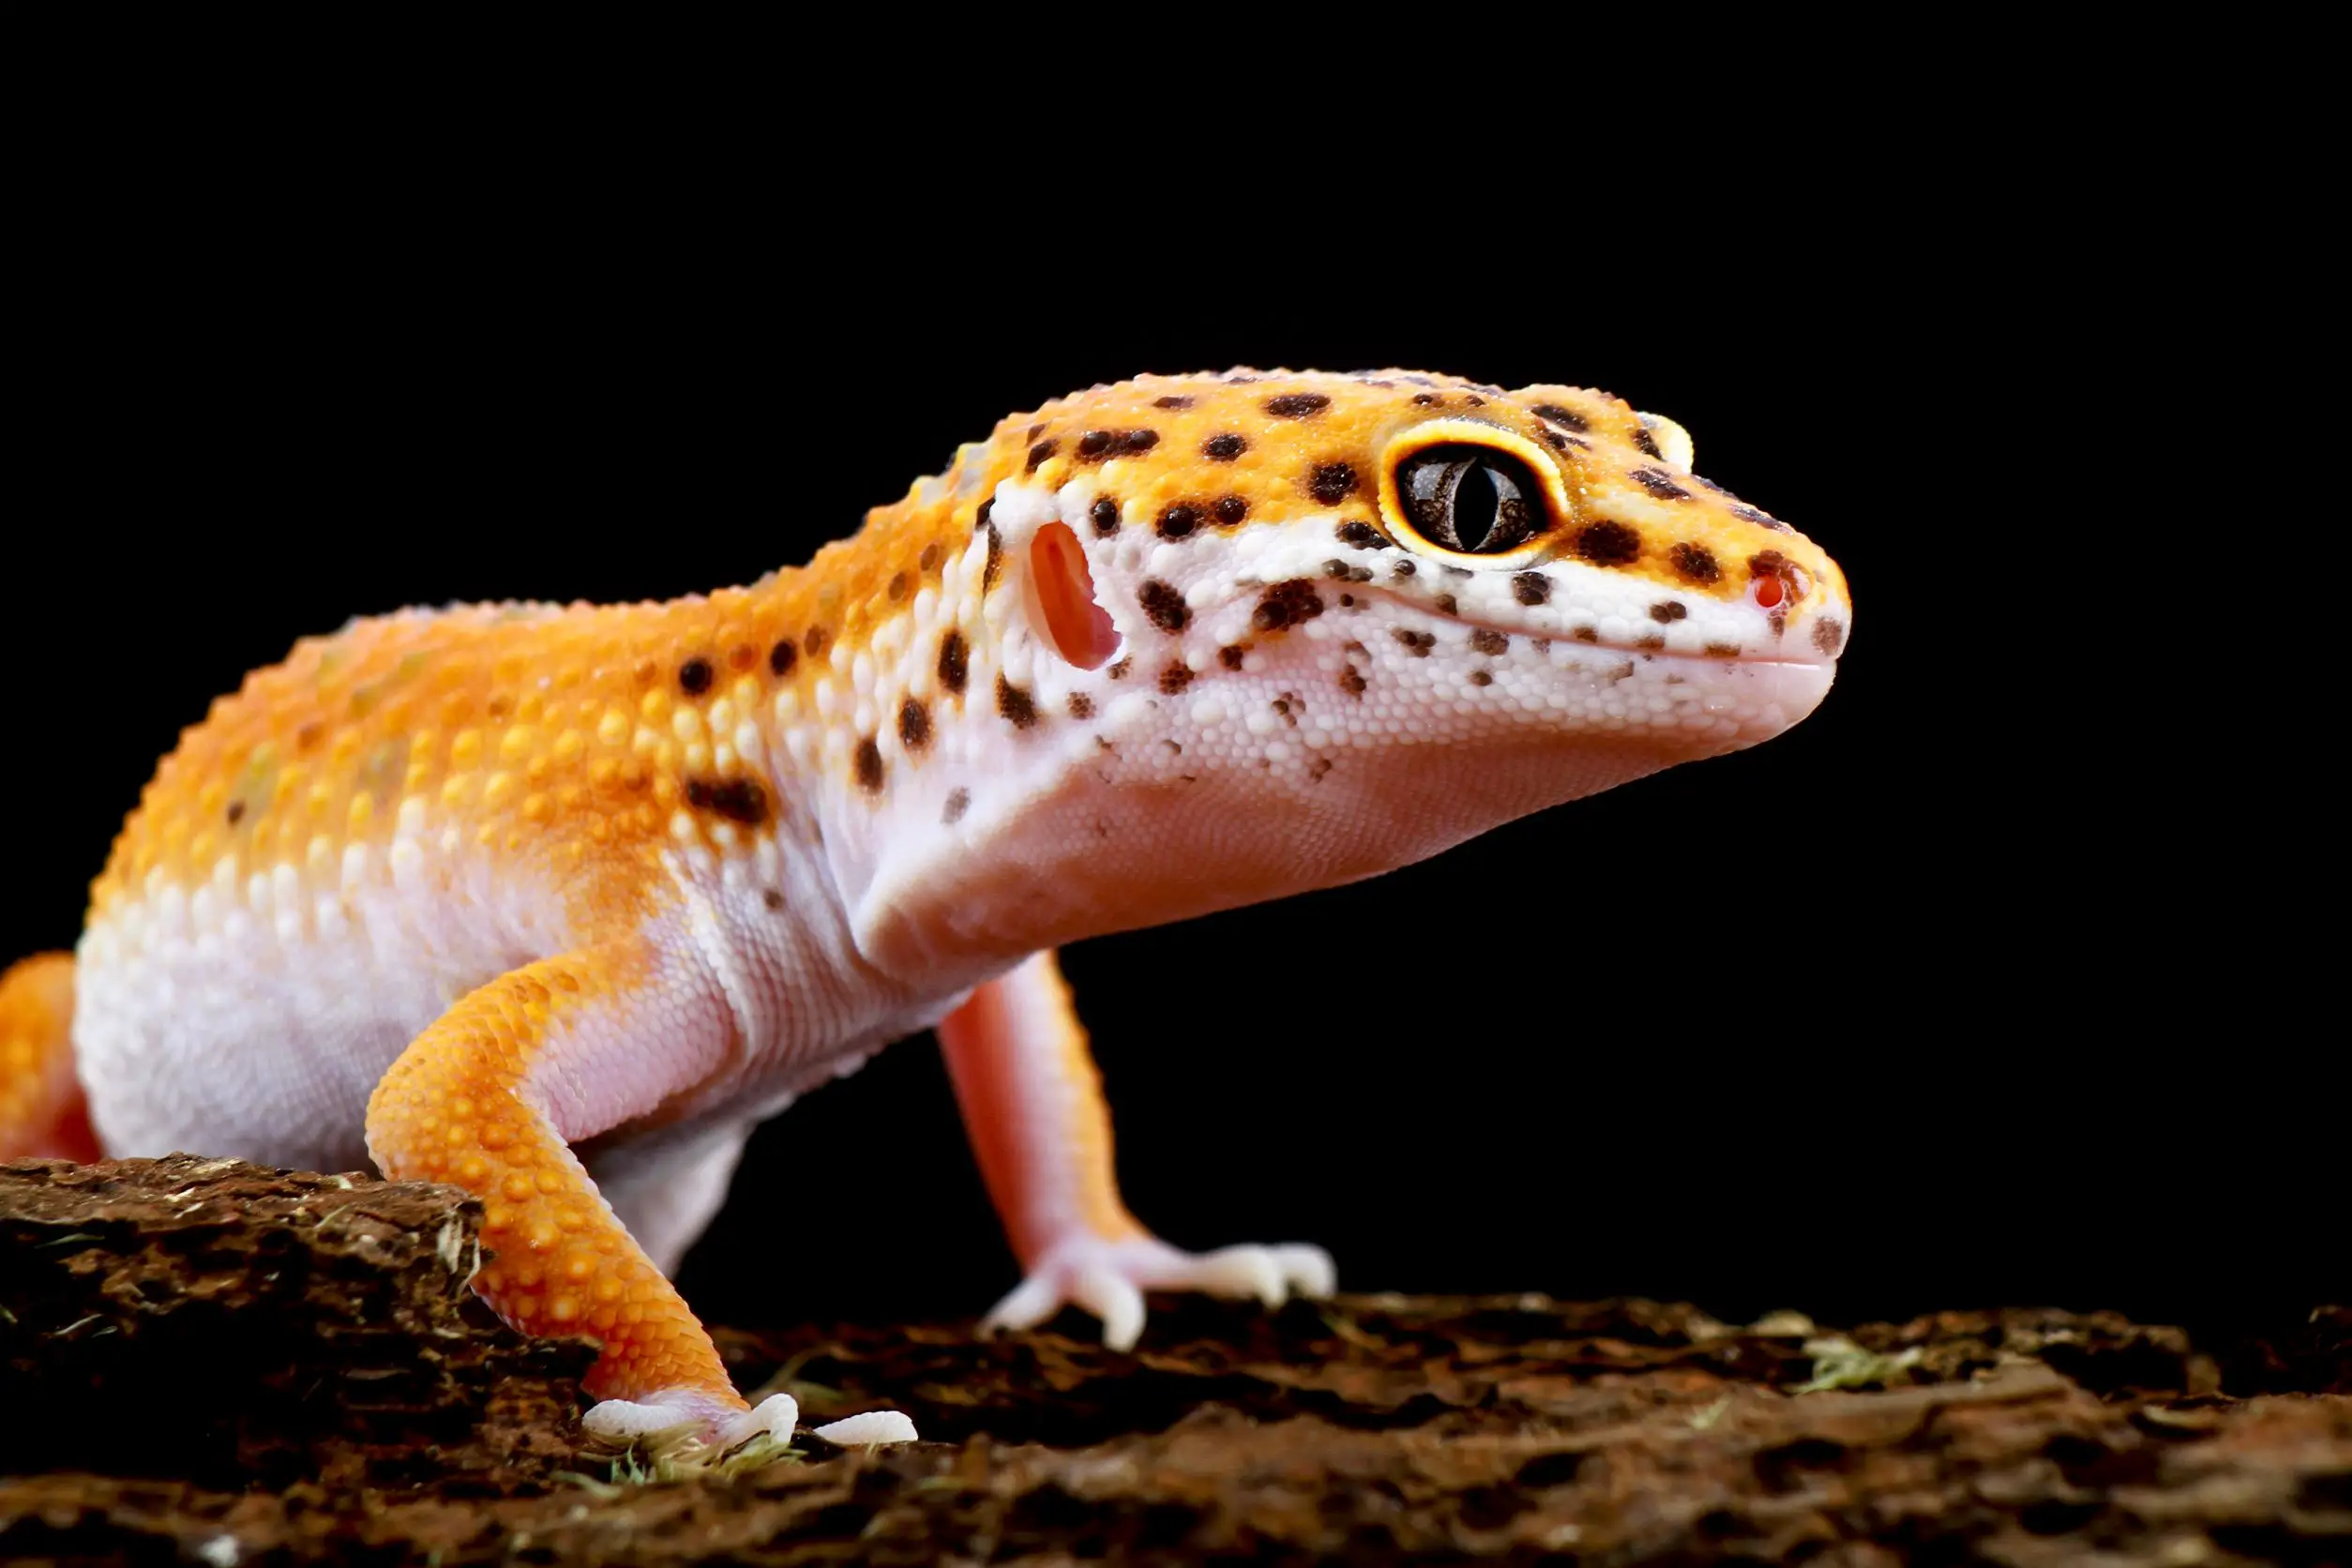 The Professional Leopard Gecko Care Sheet